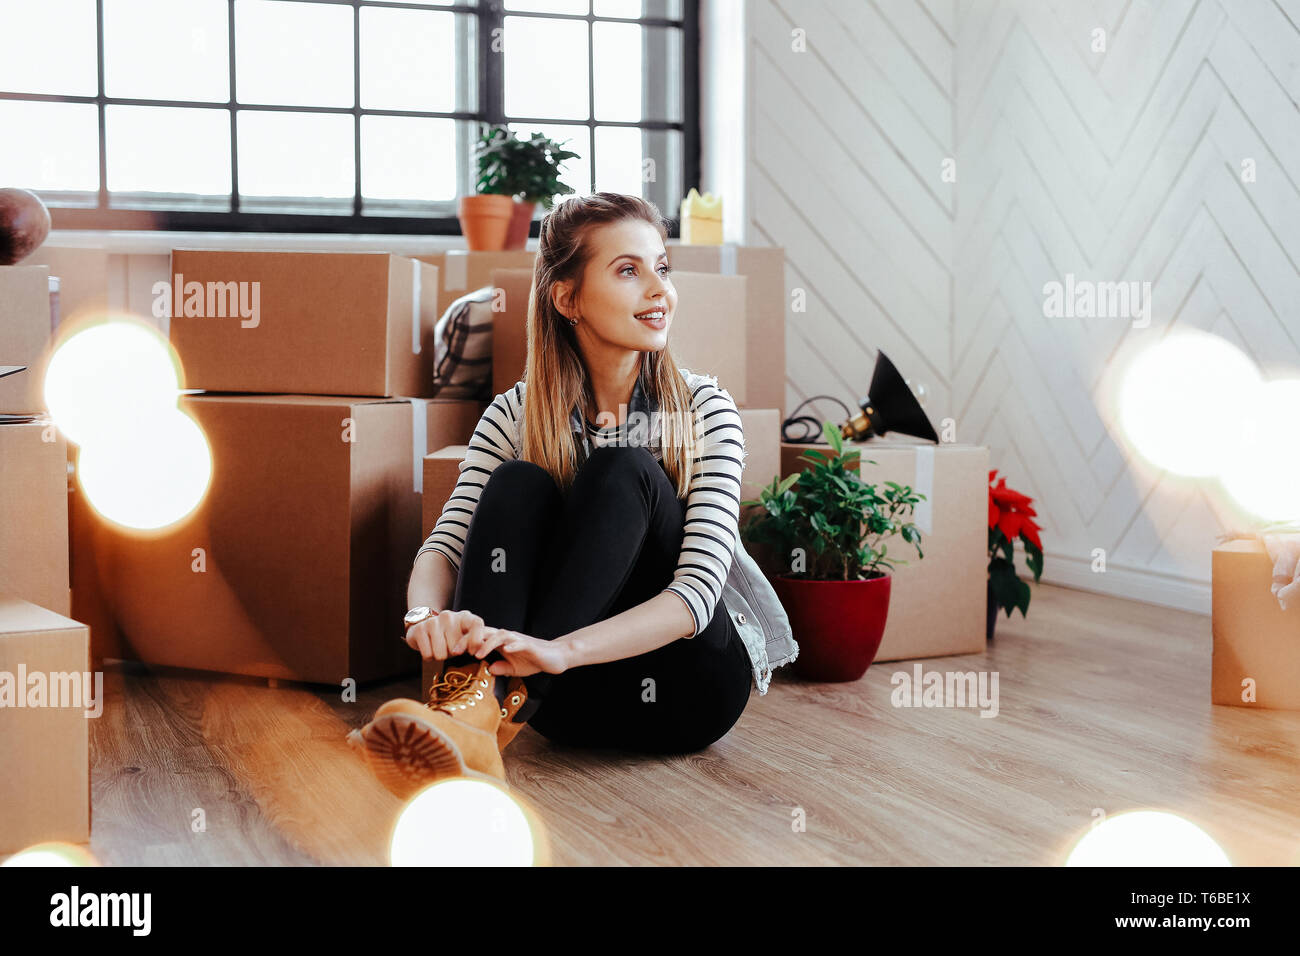 Girl is moving to new home Stock Photo